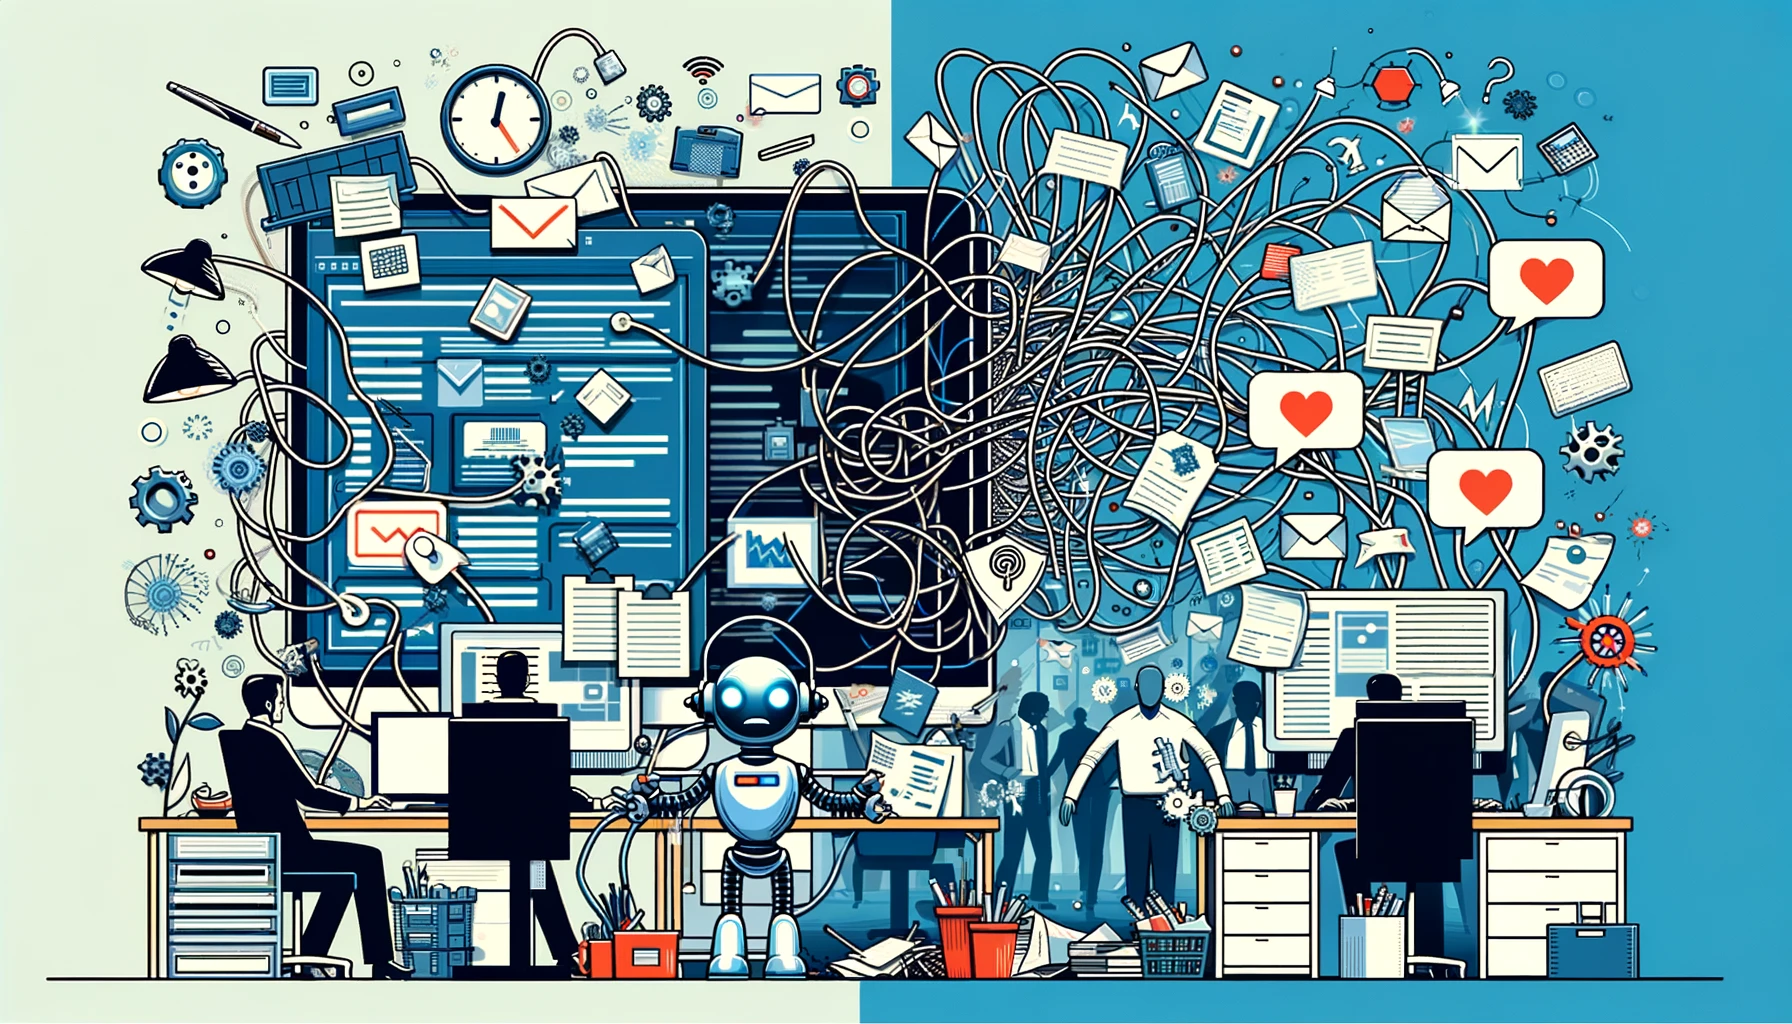 A wide, simple image illustrating the pitfalls of Business Process Automation, featuring challenges like error messages and tangled wires on the left, and overwhelmed employees on the right, highlighting the need for careful implementation of Efficiency Tools.